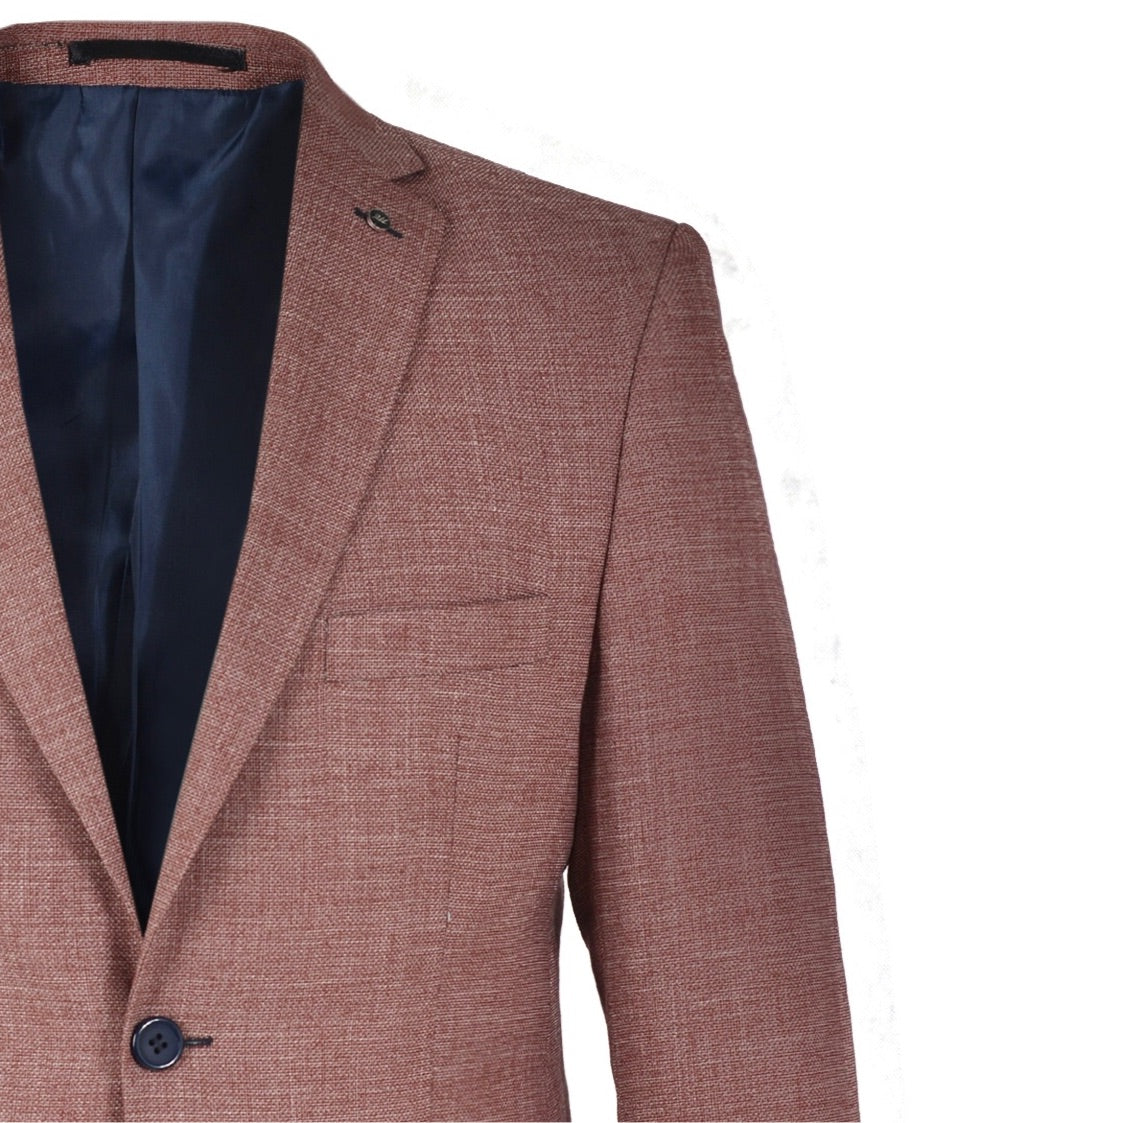 SALE! 2H Brick red Casual Suit